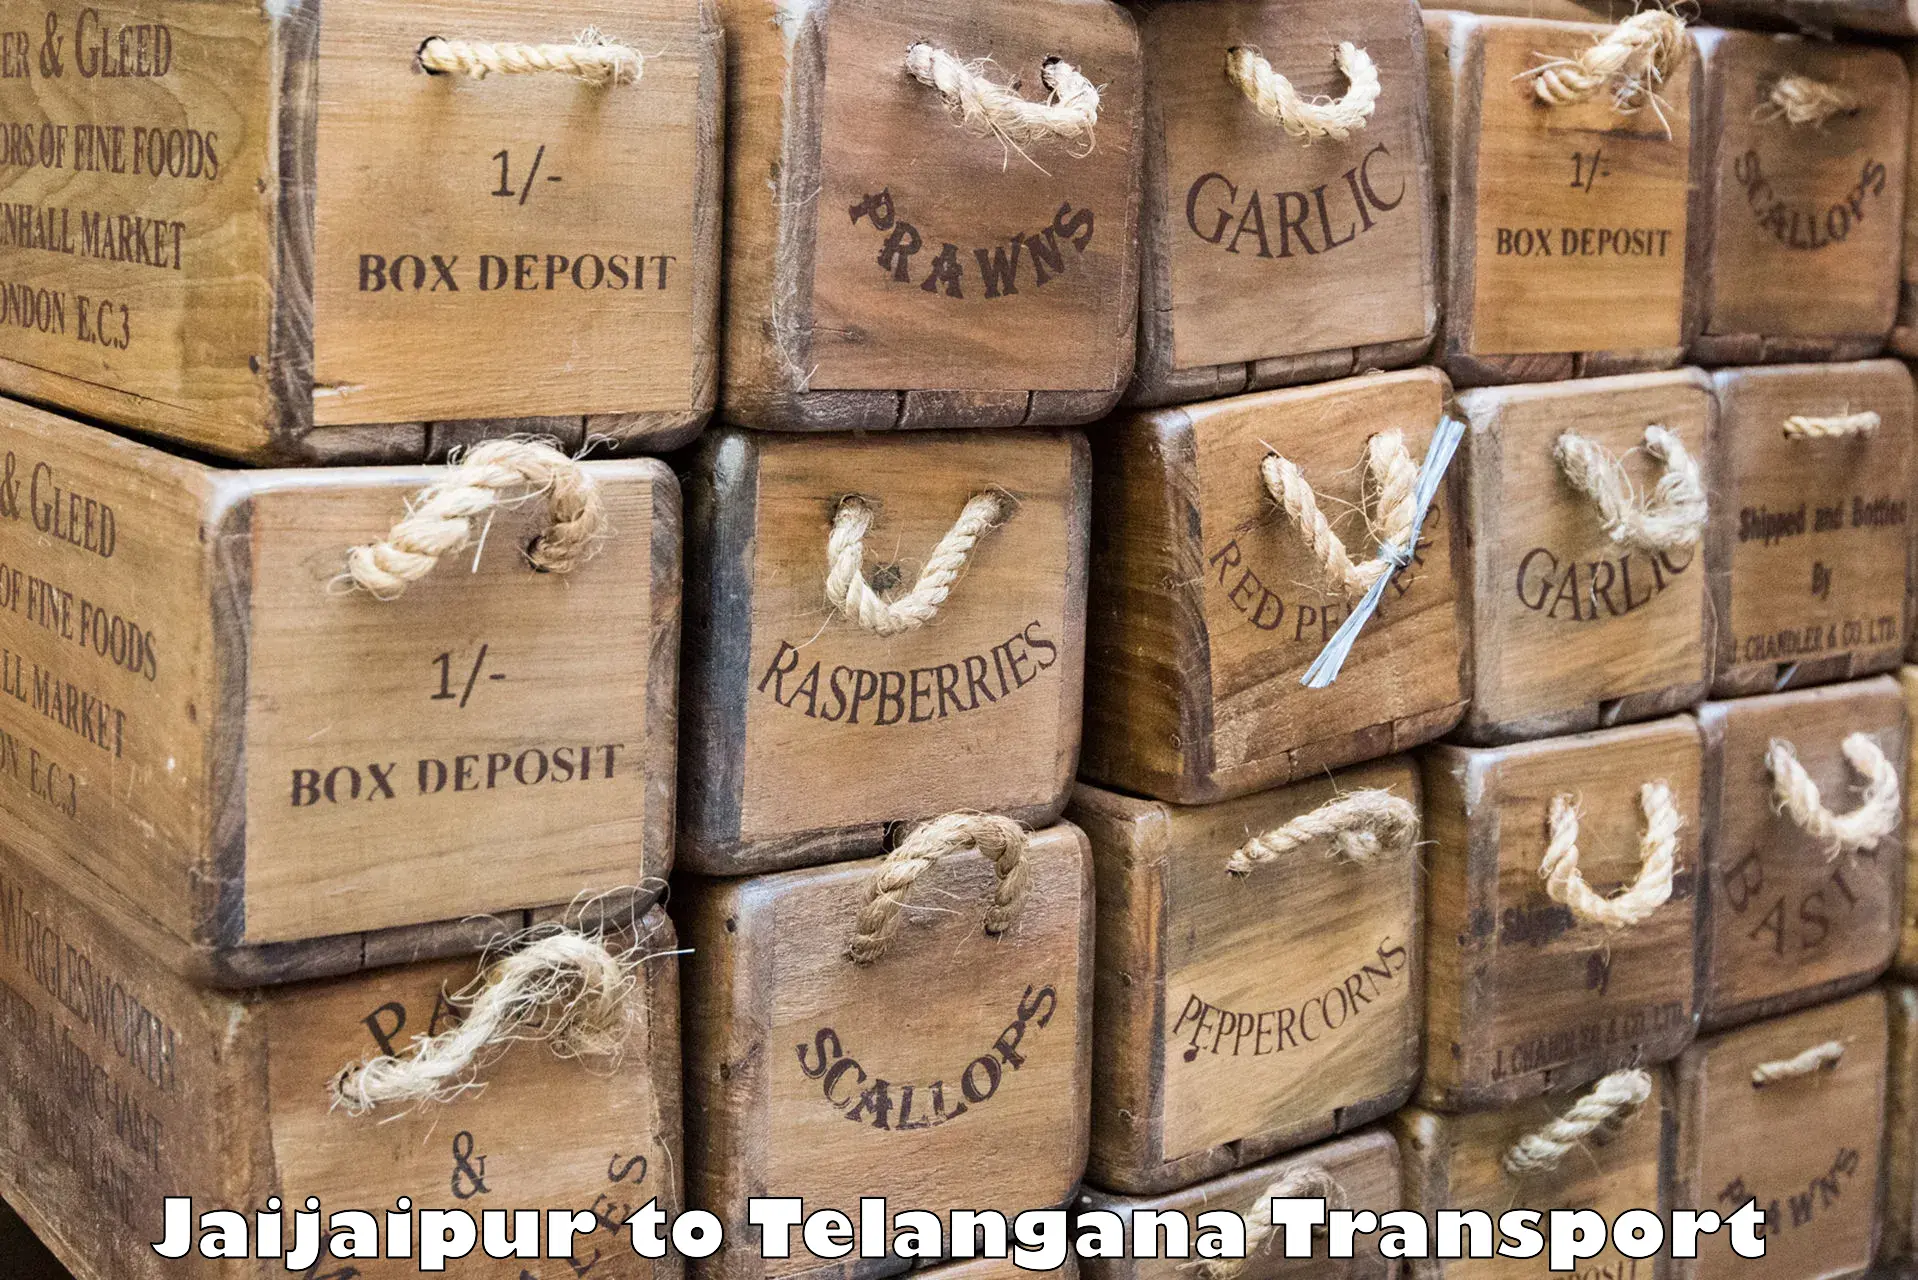 Container transport service in Jaijaipur to Secunderabad